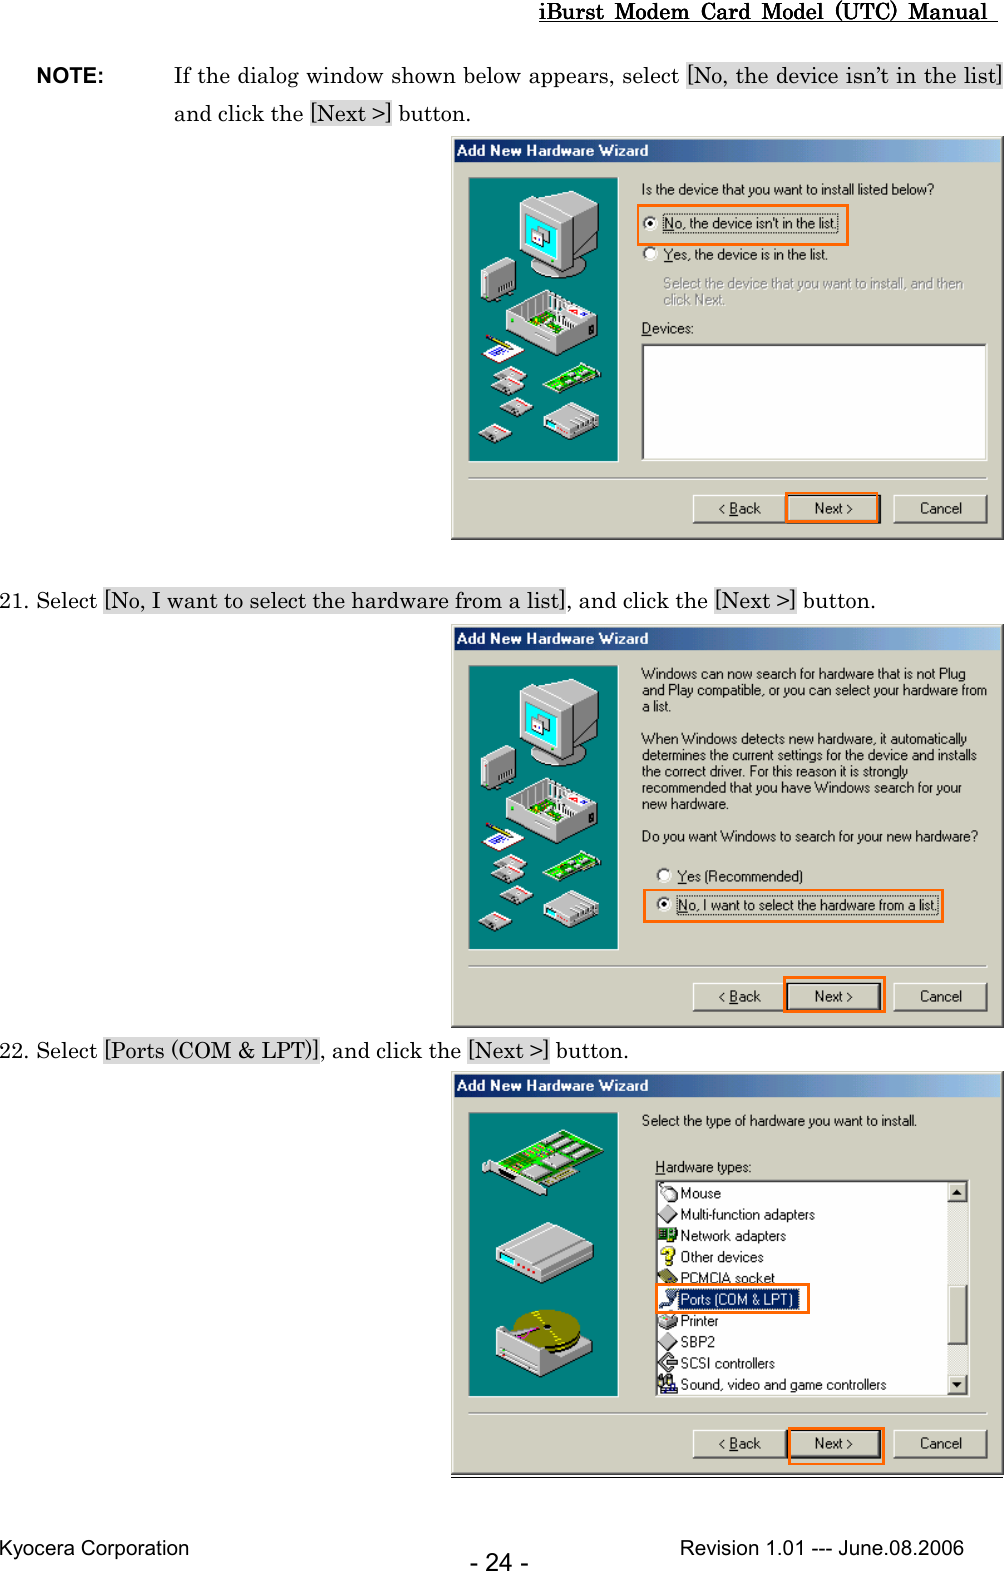 iBurst  Modem  Card  Model  (UTC)  Manual iBurst  Modem  Card  Model  (UTC)  Manual iBurst  Modem  Card  Model  (UTC)  Manual iBurst  Modem  Card  Model  (UTC)  Manual       Kyocera Corporation                                                                                              Revision 1.01 --- June.08.2006 - 24 - NOTE:  If the dialog window shown below appears, select [No, the device isn’t in the list] and click the [Next &gt;] button.   21. Select [No, I want to select the hardware from a list], and click the [Next &gt;] button.  22. Select [Ports (COM &amp; LPT)], and click the [Next &gt;] button.   